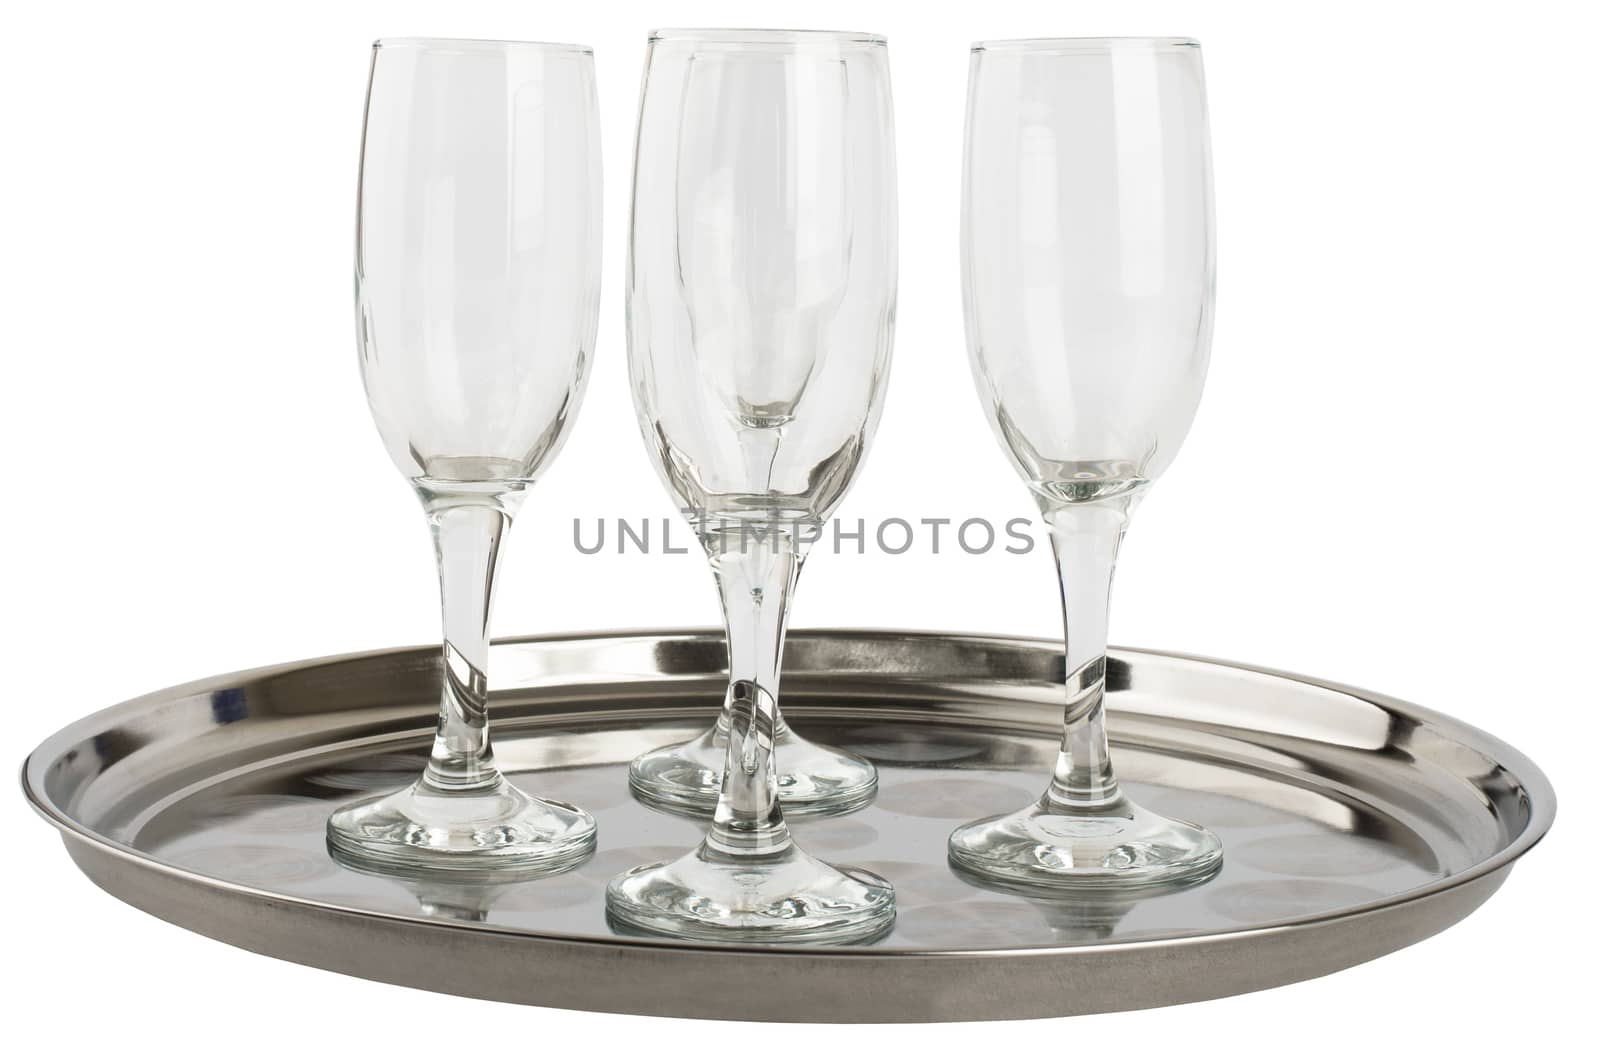 Many champagne glasses on tray by cherezoff